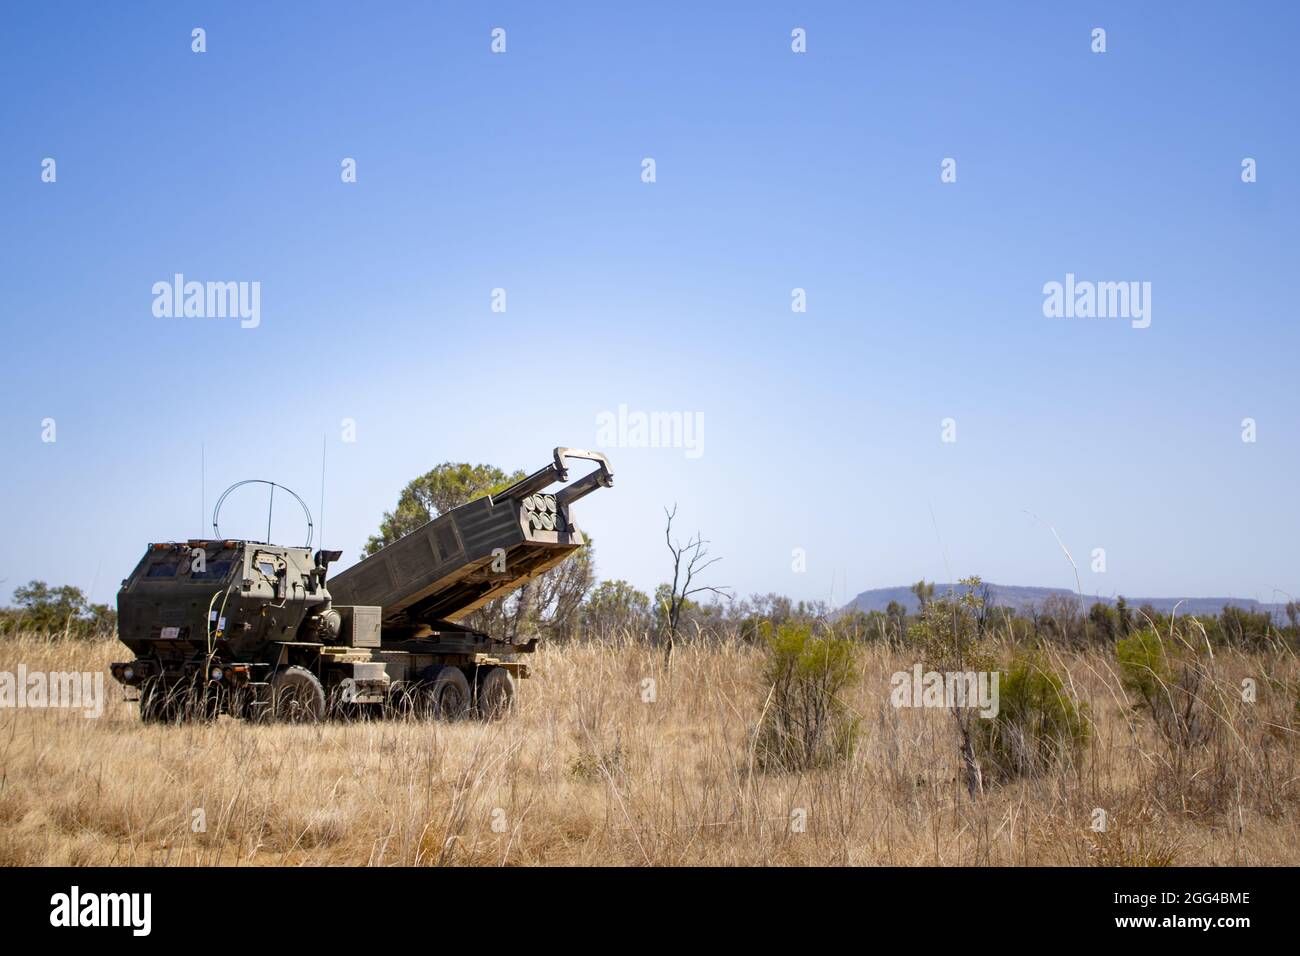 A High Mobility Artillery Rocket System assigned to Marine Rotational Force - Darwin aims it’s launcher while conducting an emergency fire mission rehearsal during Exercise Koolendong at Bradshaw Field Training Area, NT, Australia, Aug. 25, 2021. An emergency fire mission consists of HIMARS receiving a target location, convoying to a firing point, firing a payload and retrograding to a safe location. Exercise Koolendong validates MRF-D’s and the Australian Defence Force’s ability to conduct expeditionary advanced base operations with combined innovative capabilities; and through their shared c Stock Photo